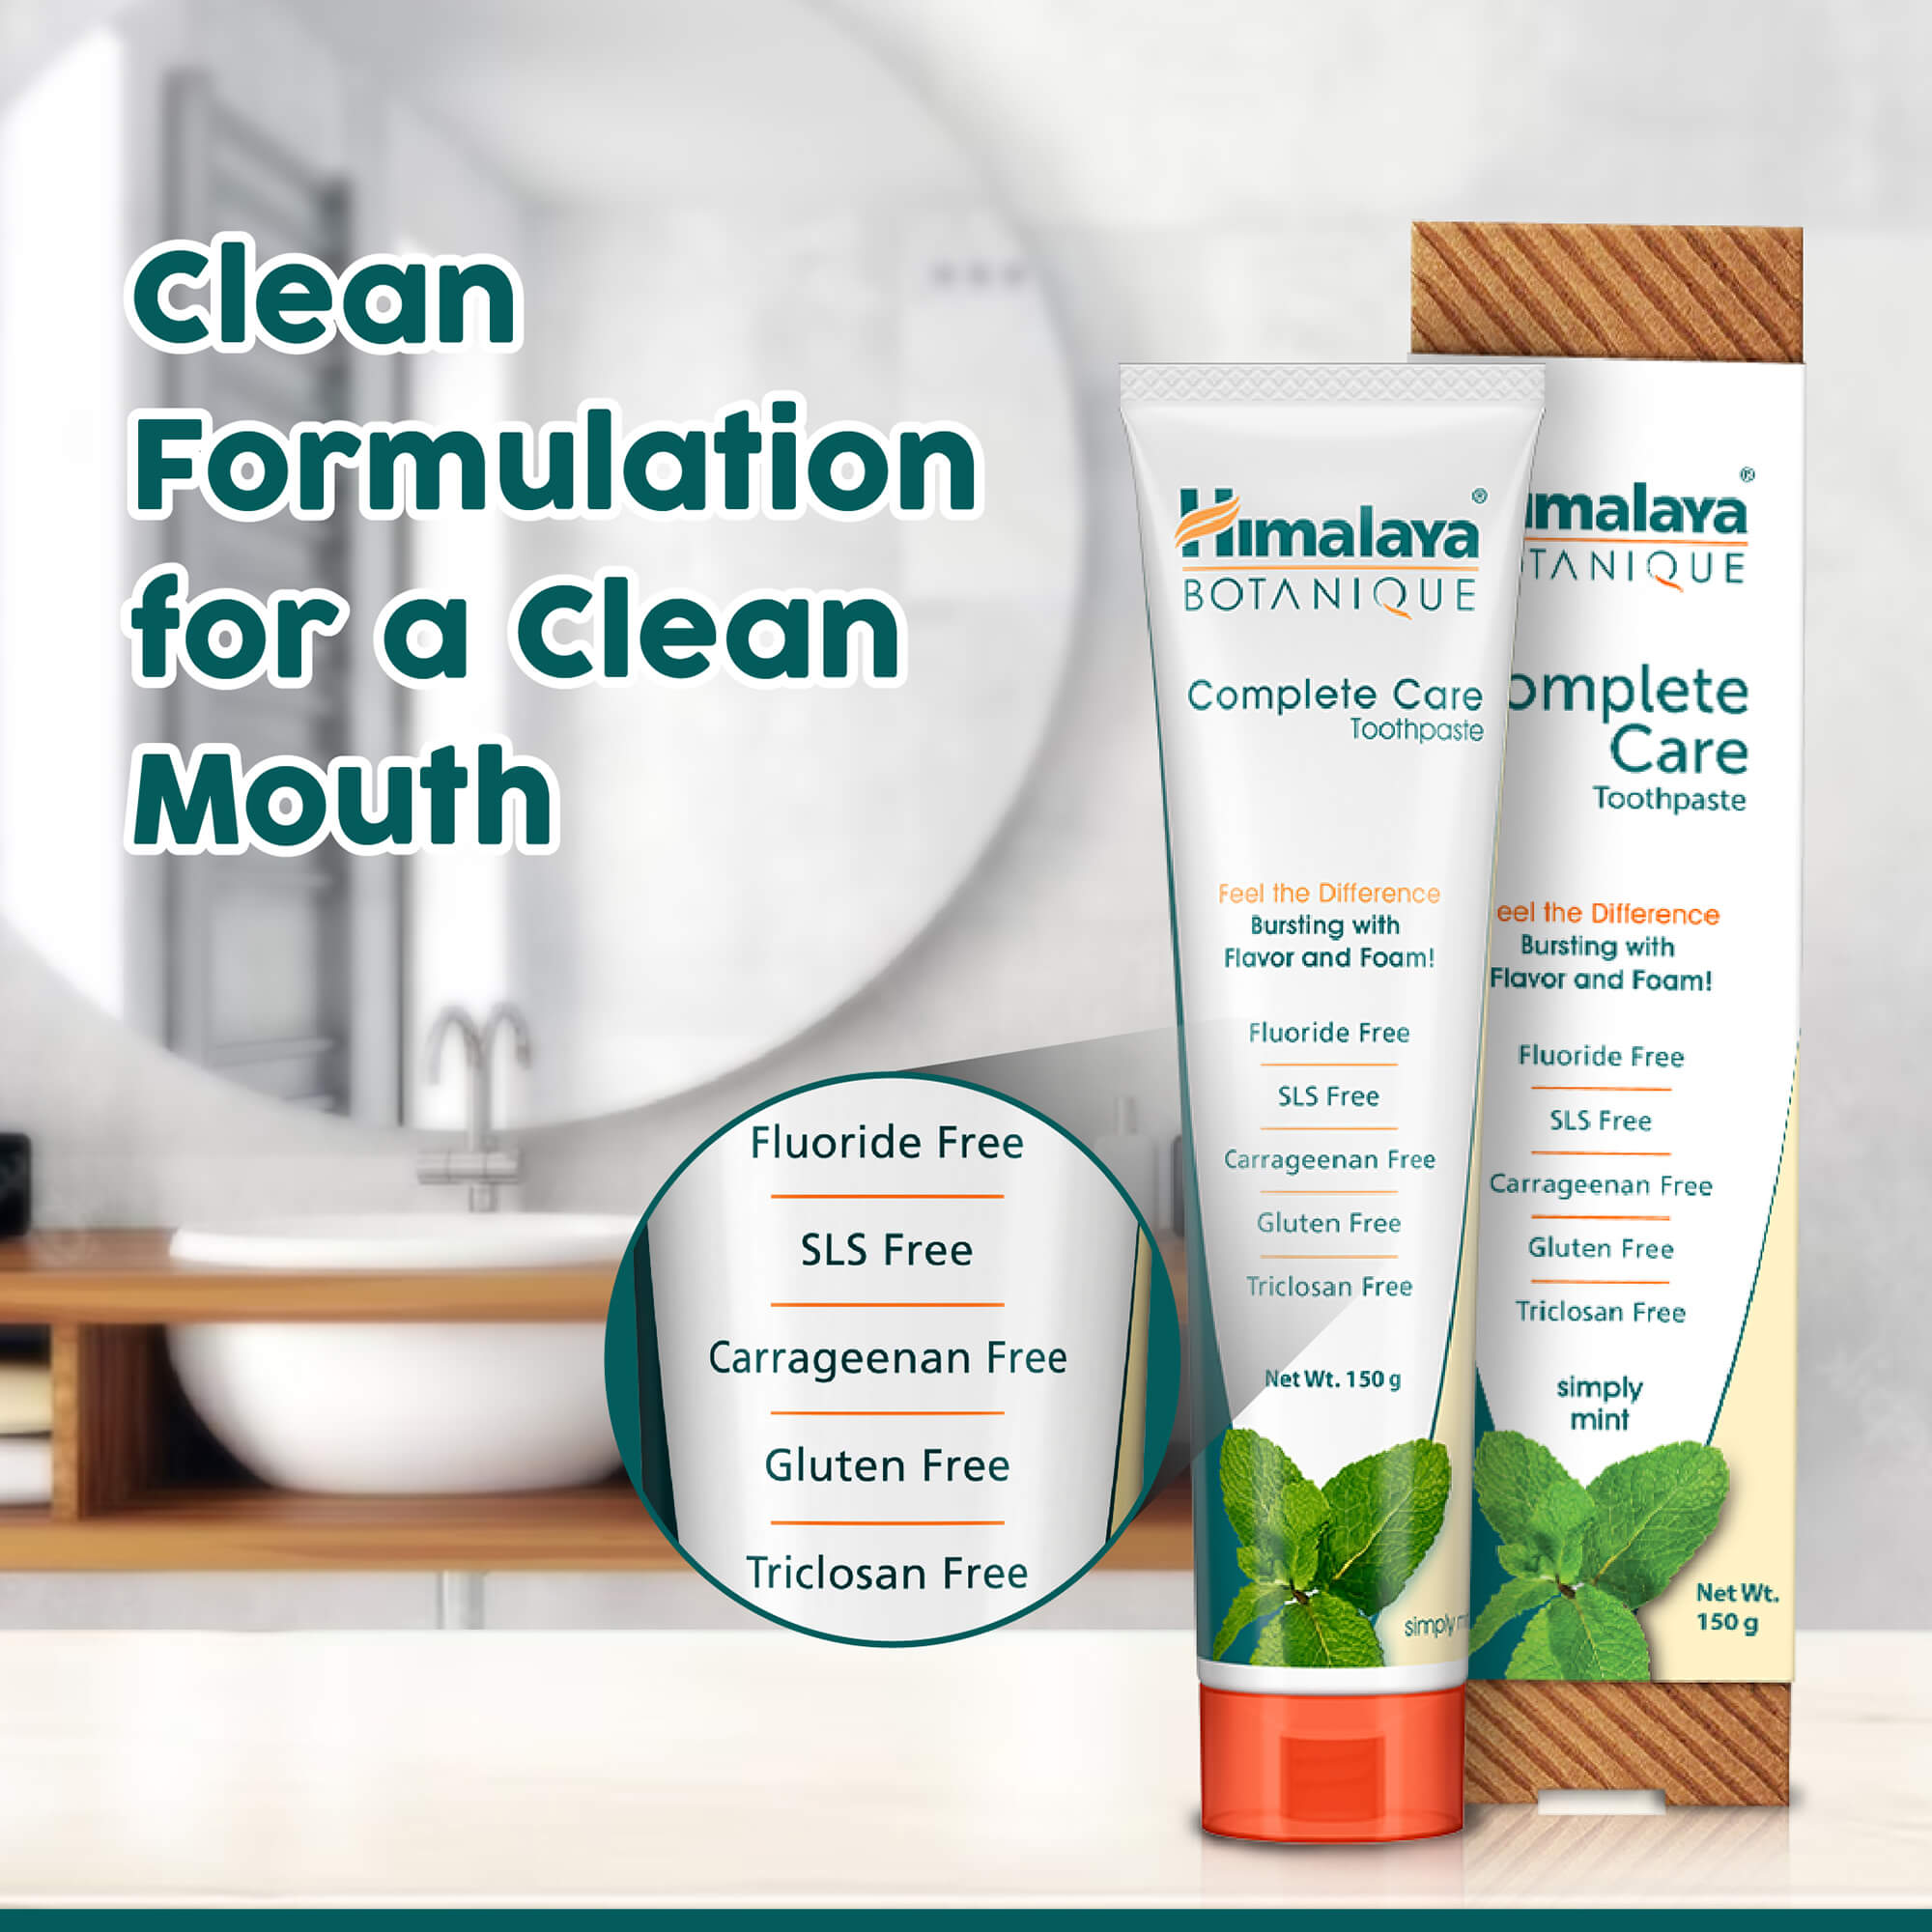 Himalaya BOTANIQUE Complete Care Toothpaste (Simply Mint) - Clean Formulation